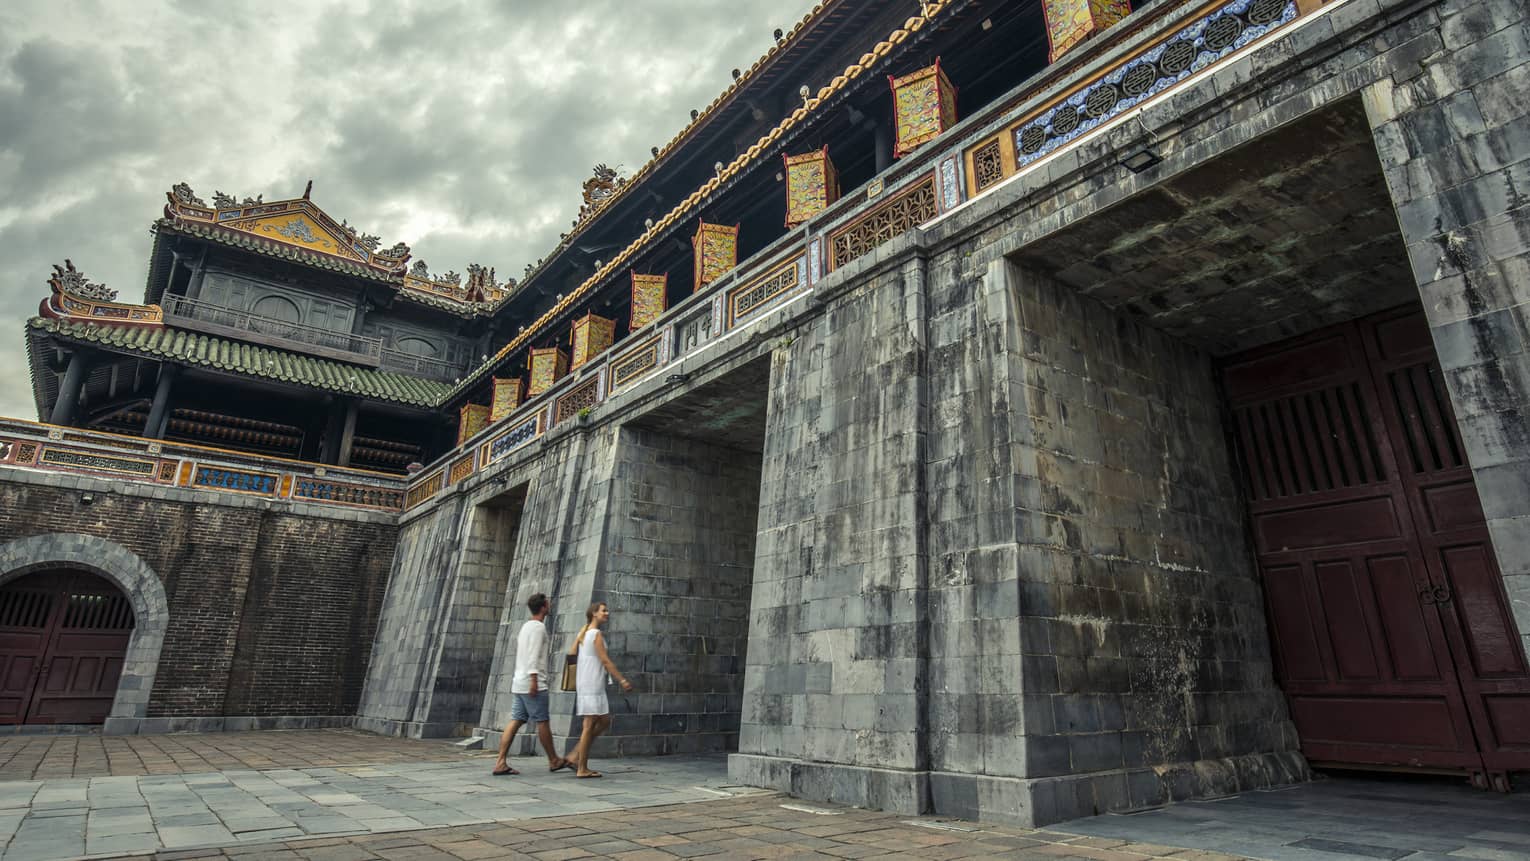 A man and woman walking through the ornate structure of Hue City - Imperial City